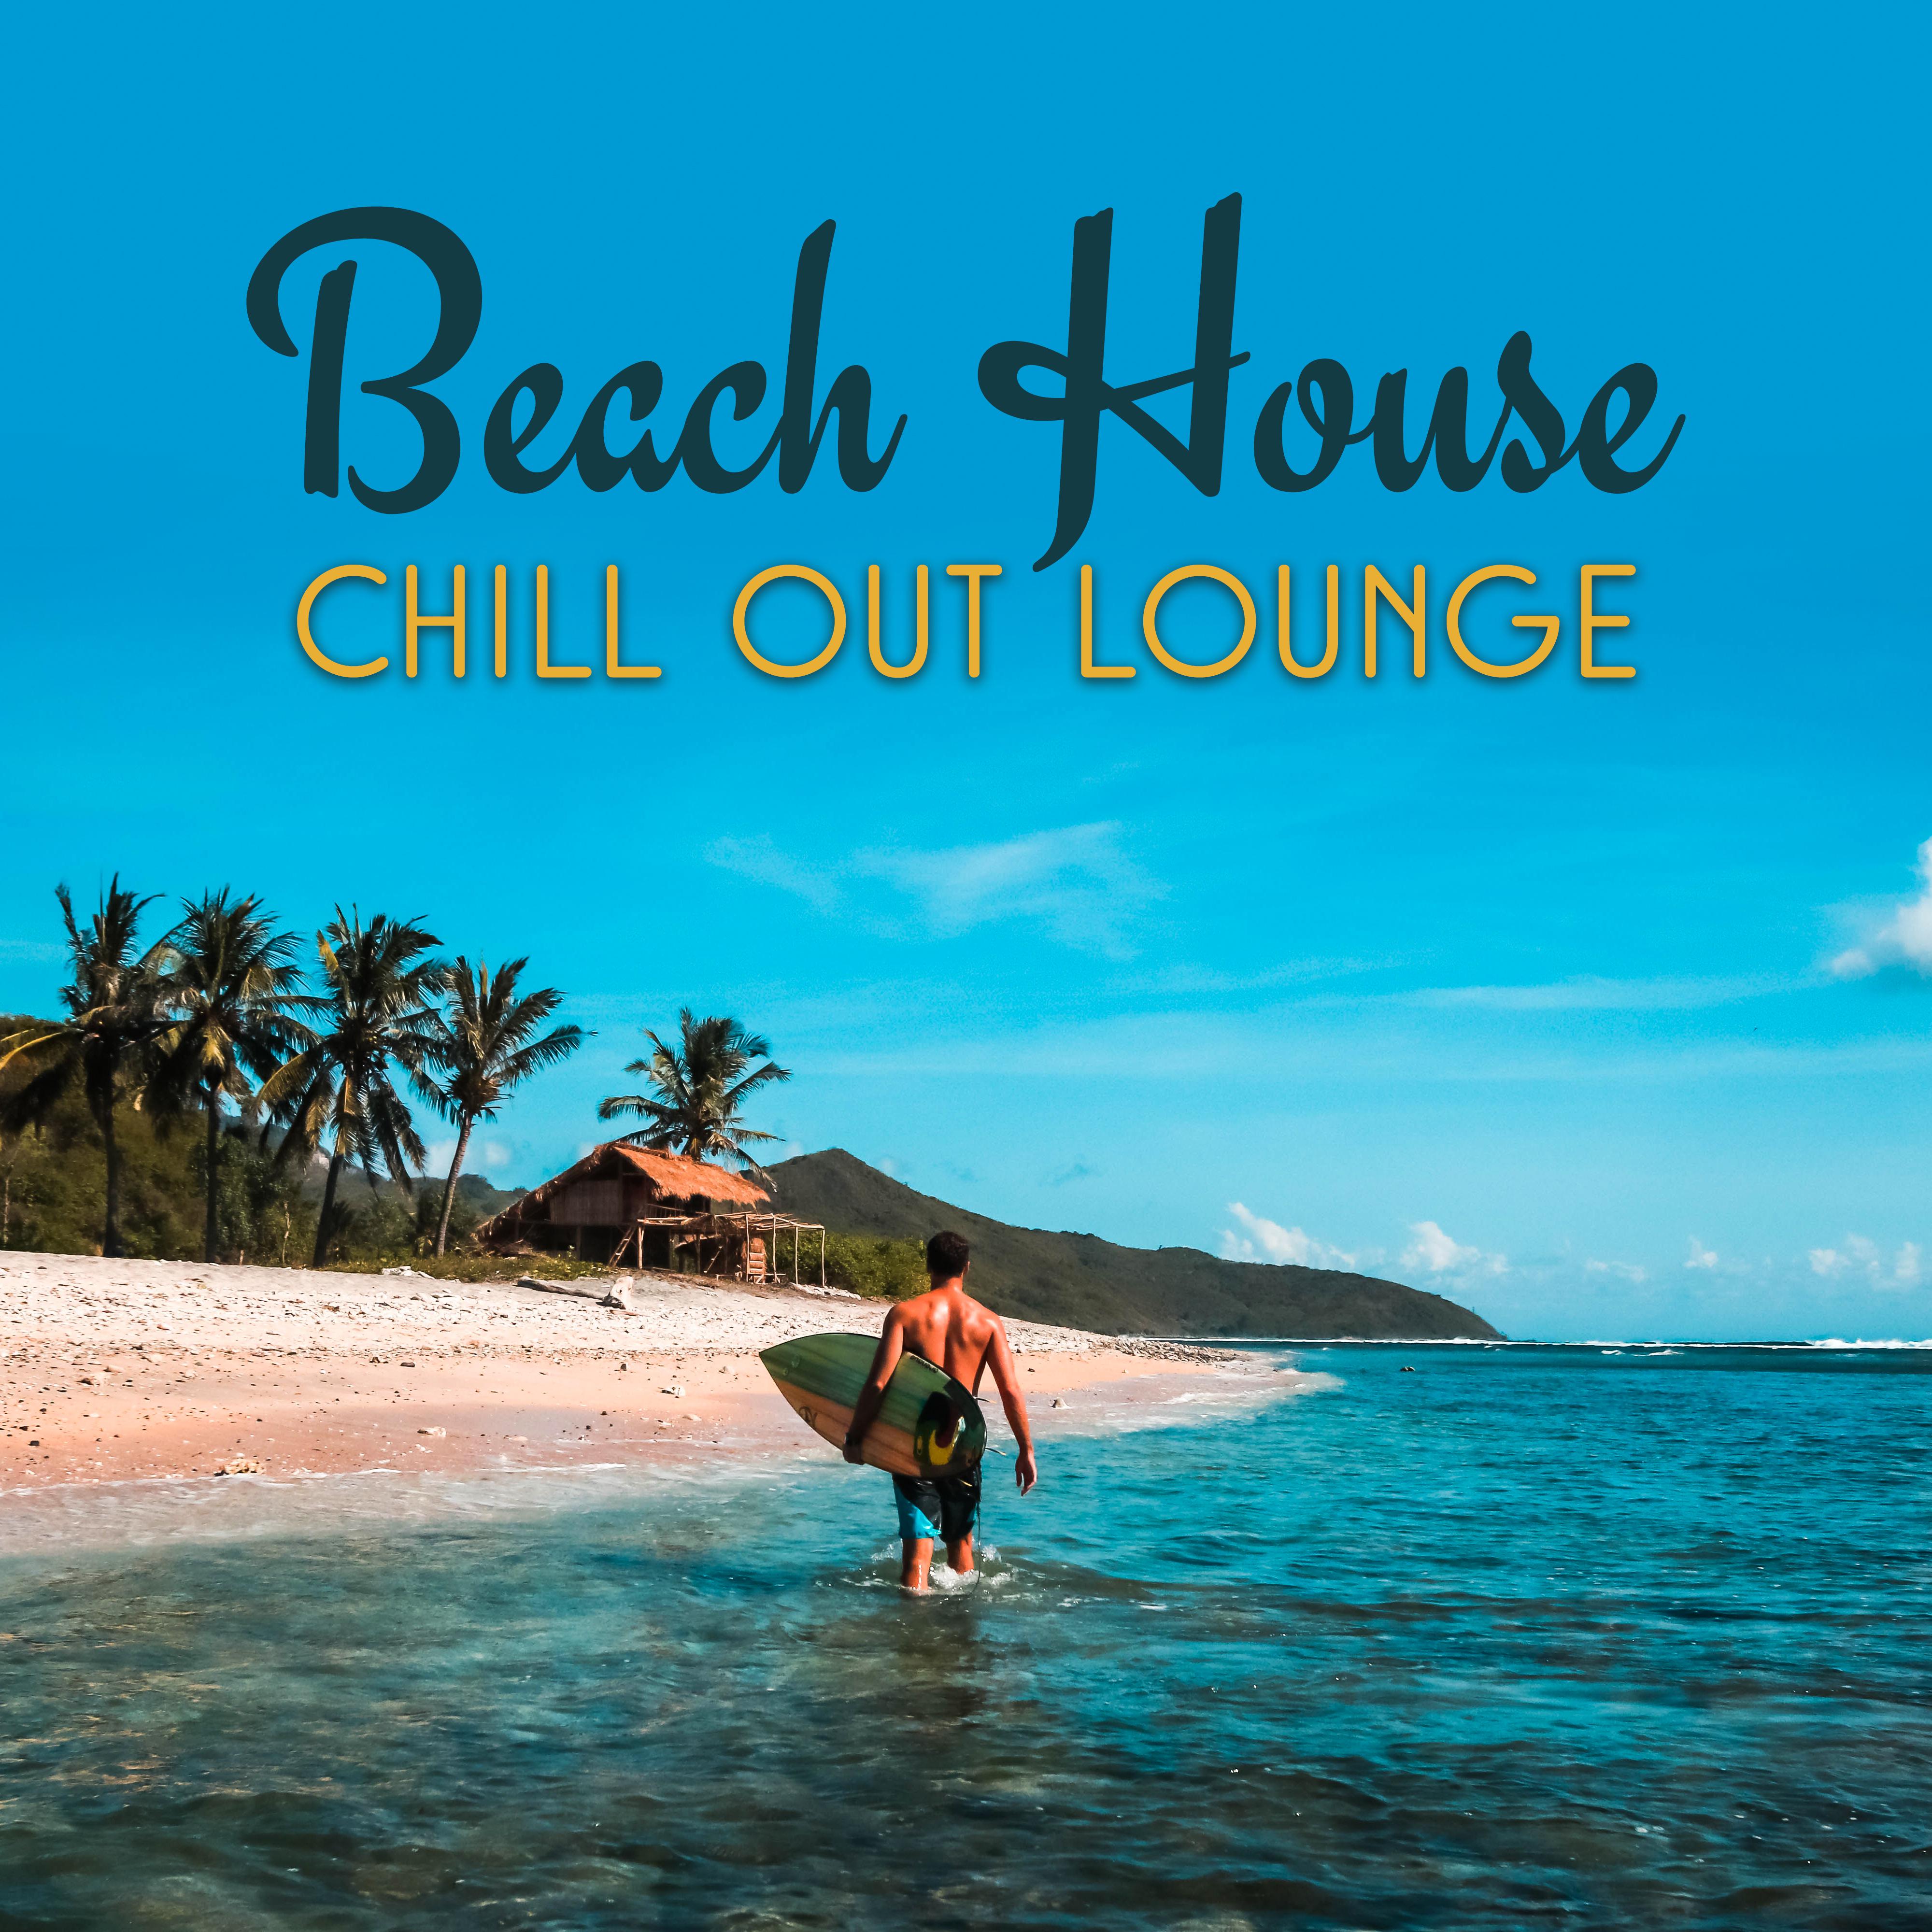 Beach House Chill Out Lounge – Summer Relaxing Music, Best Music to Rest, Stress Relief, Peaceful Vibes